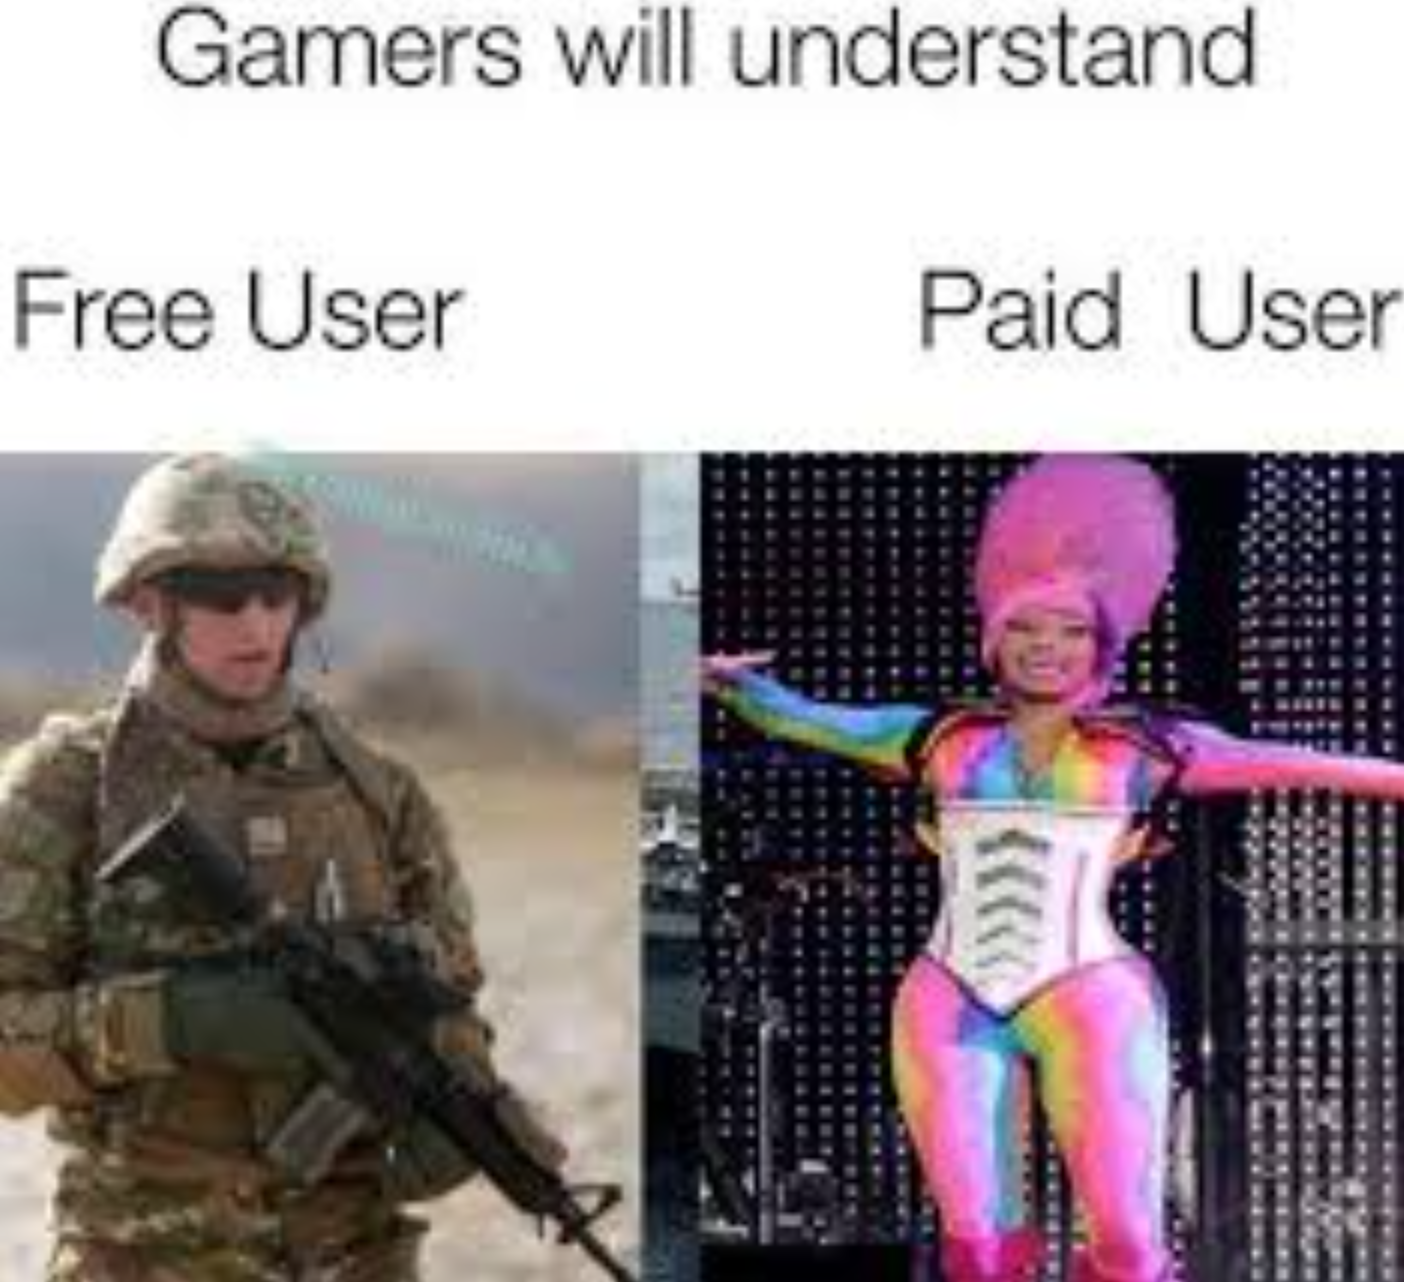 gaming memes - Gamers will understand Free User Paid User